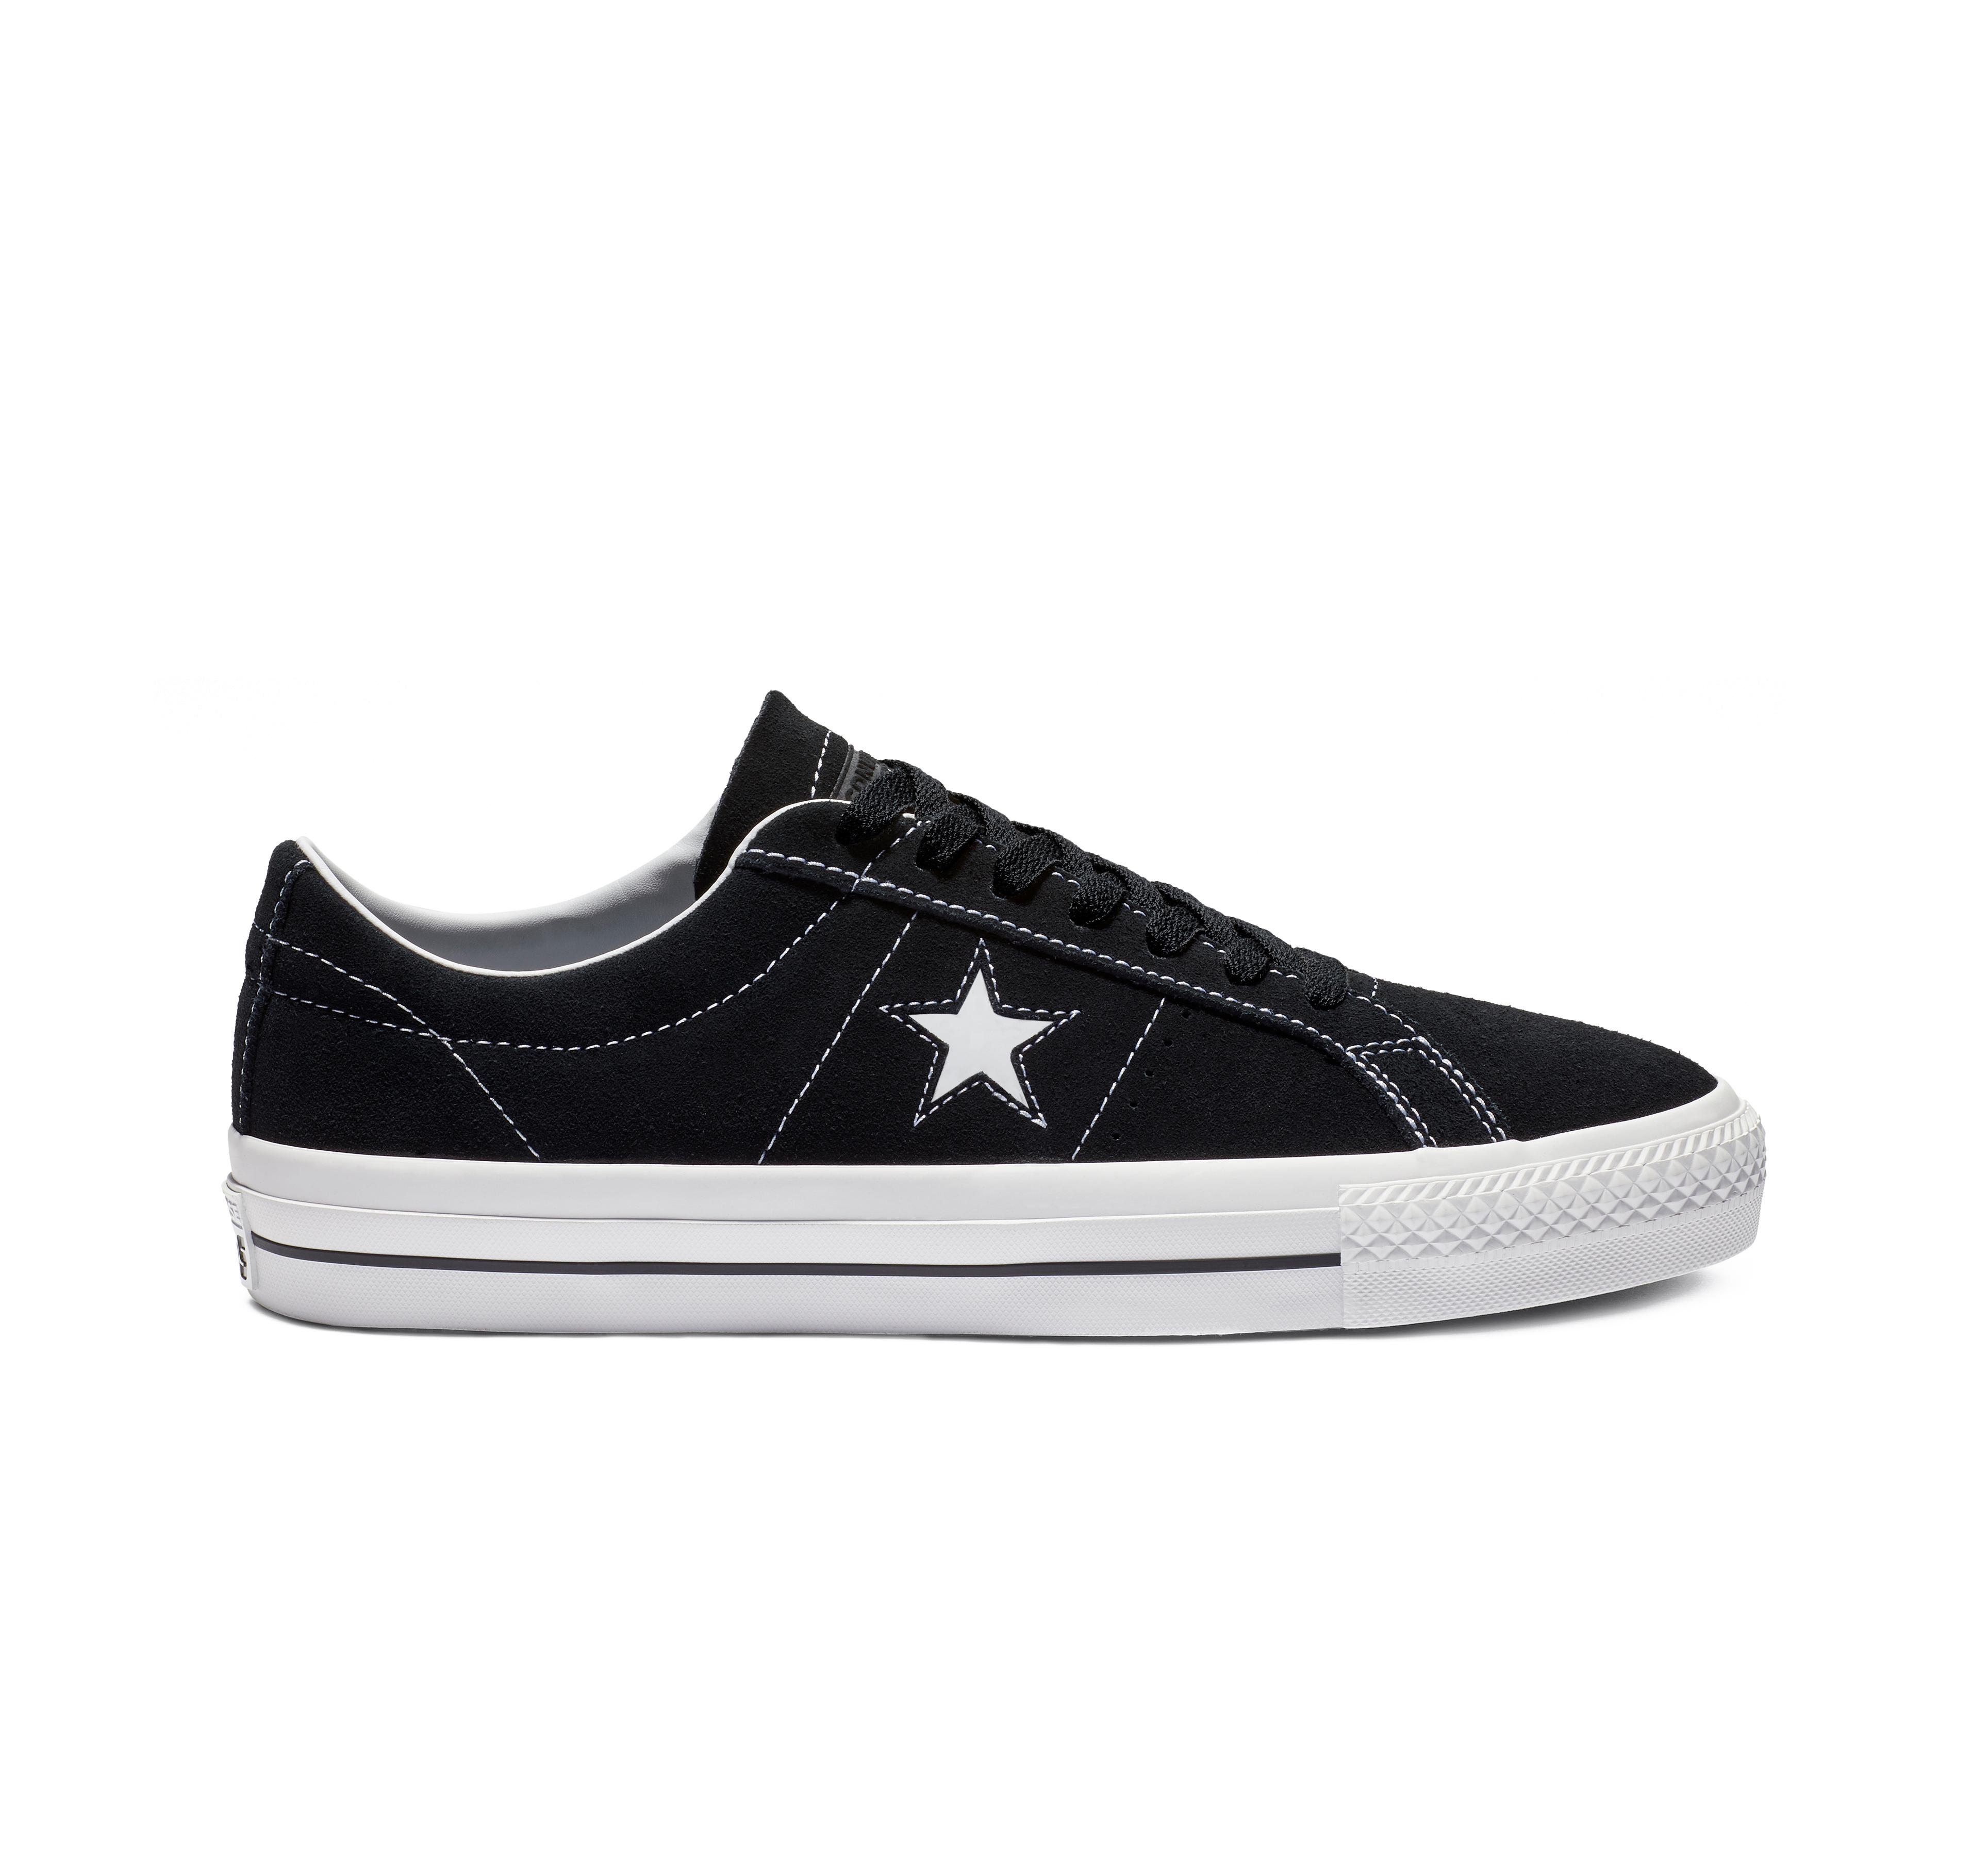 Converse One Star Pro Classic Suede Low Top in Black for Men - Save 6%